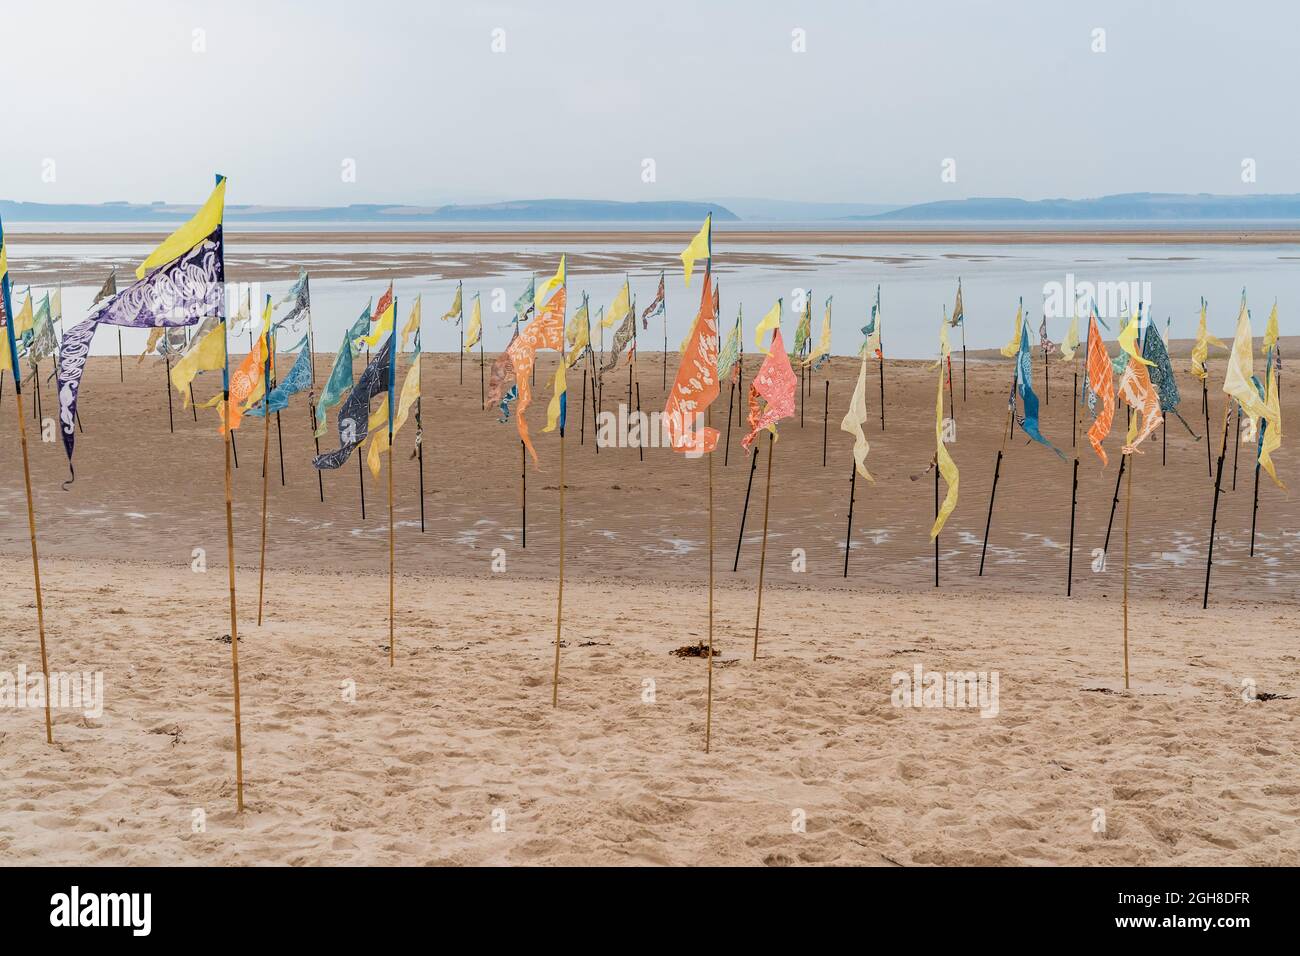 Nairn East Beach, Highlands, Scotland, UK. 5th September, 2021. As part of the Nairn Books and Arts Festival there was a Kinetika Flag Installation. ' A stunning installation of 500 naturally dyed silk flags on Nairn’s East Beach by international outdoor arts company Kinetika. Created by communities along the East coast of the UK as part of the Beach of Dreams project, the flags will be enhanced by flags inspired by Nairn Beach created by members of the local community at workshops led by Ali Pretty, Artistic Director of Kinetika. ' CREDIT - JASPERIMAGE/AlamyLiveNews Stock Photo